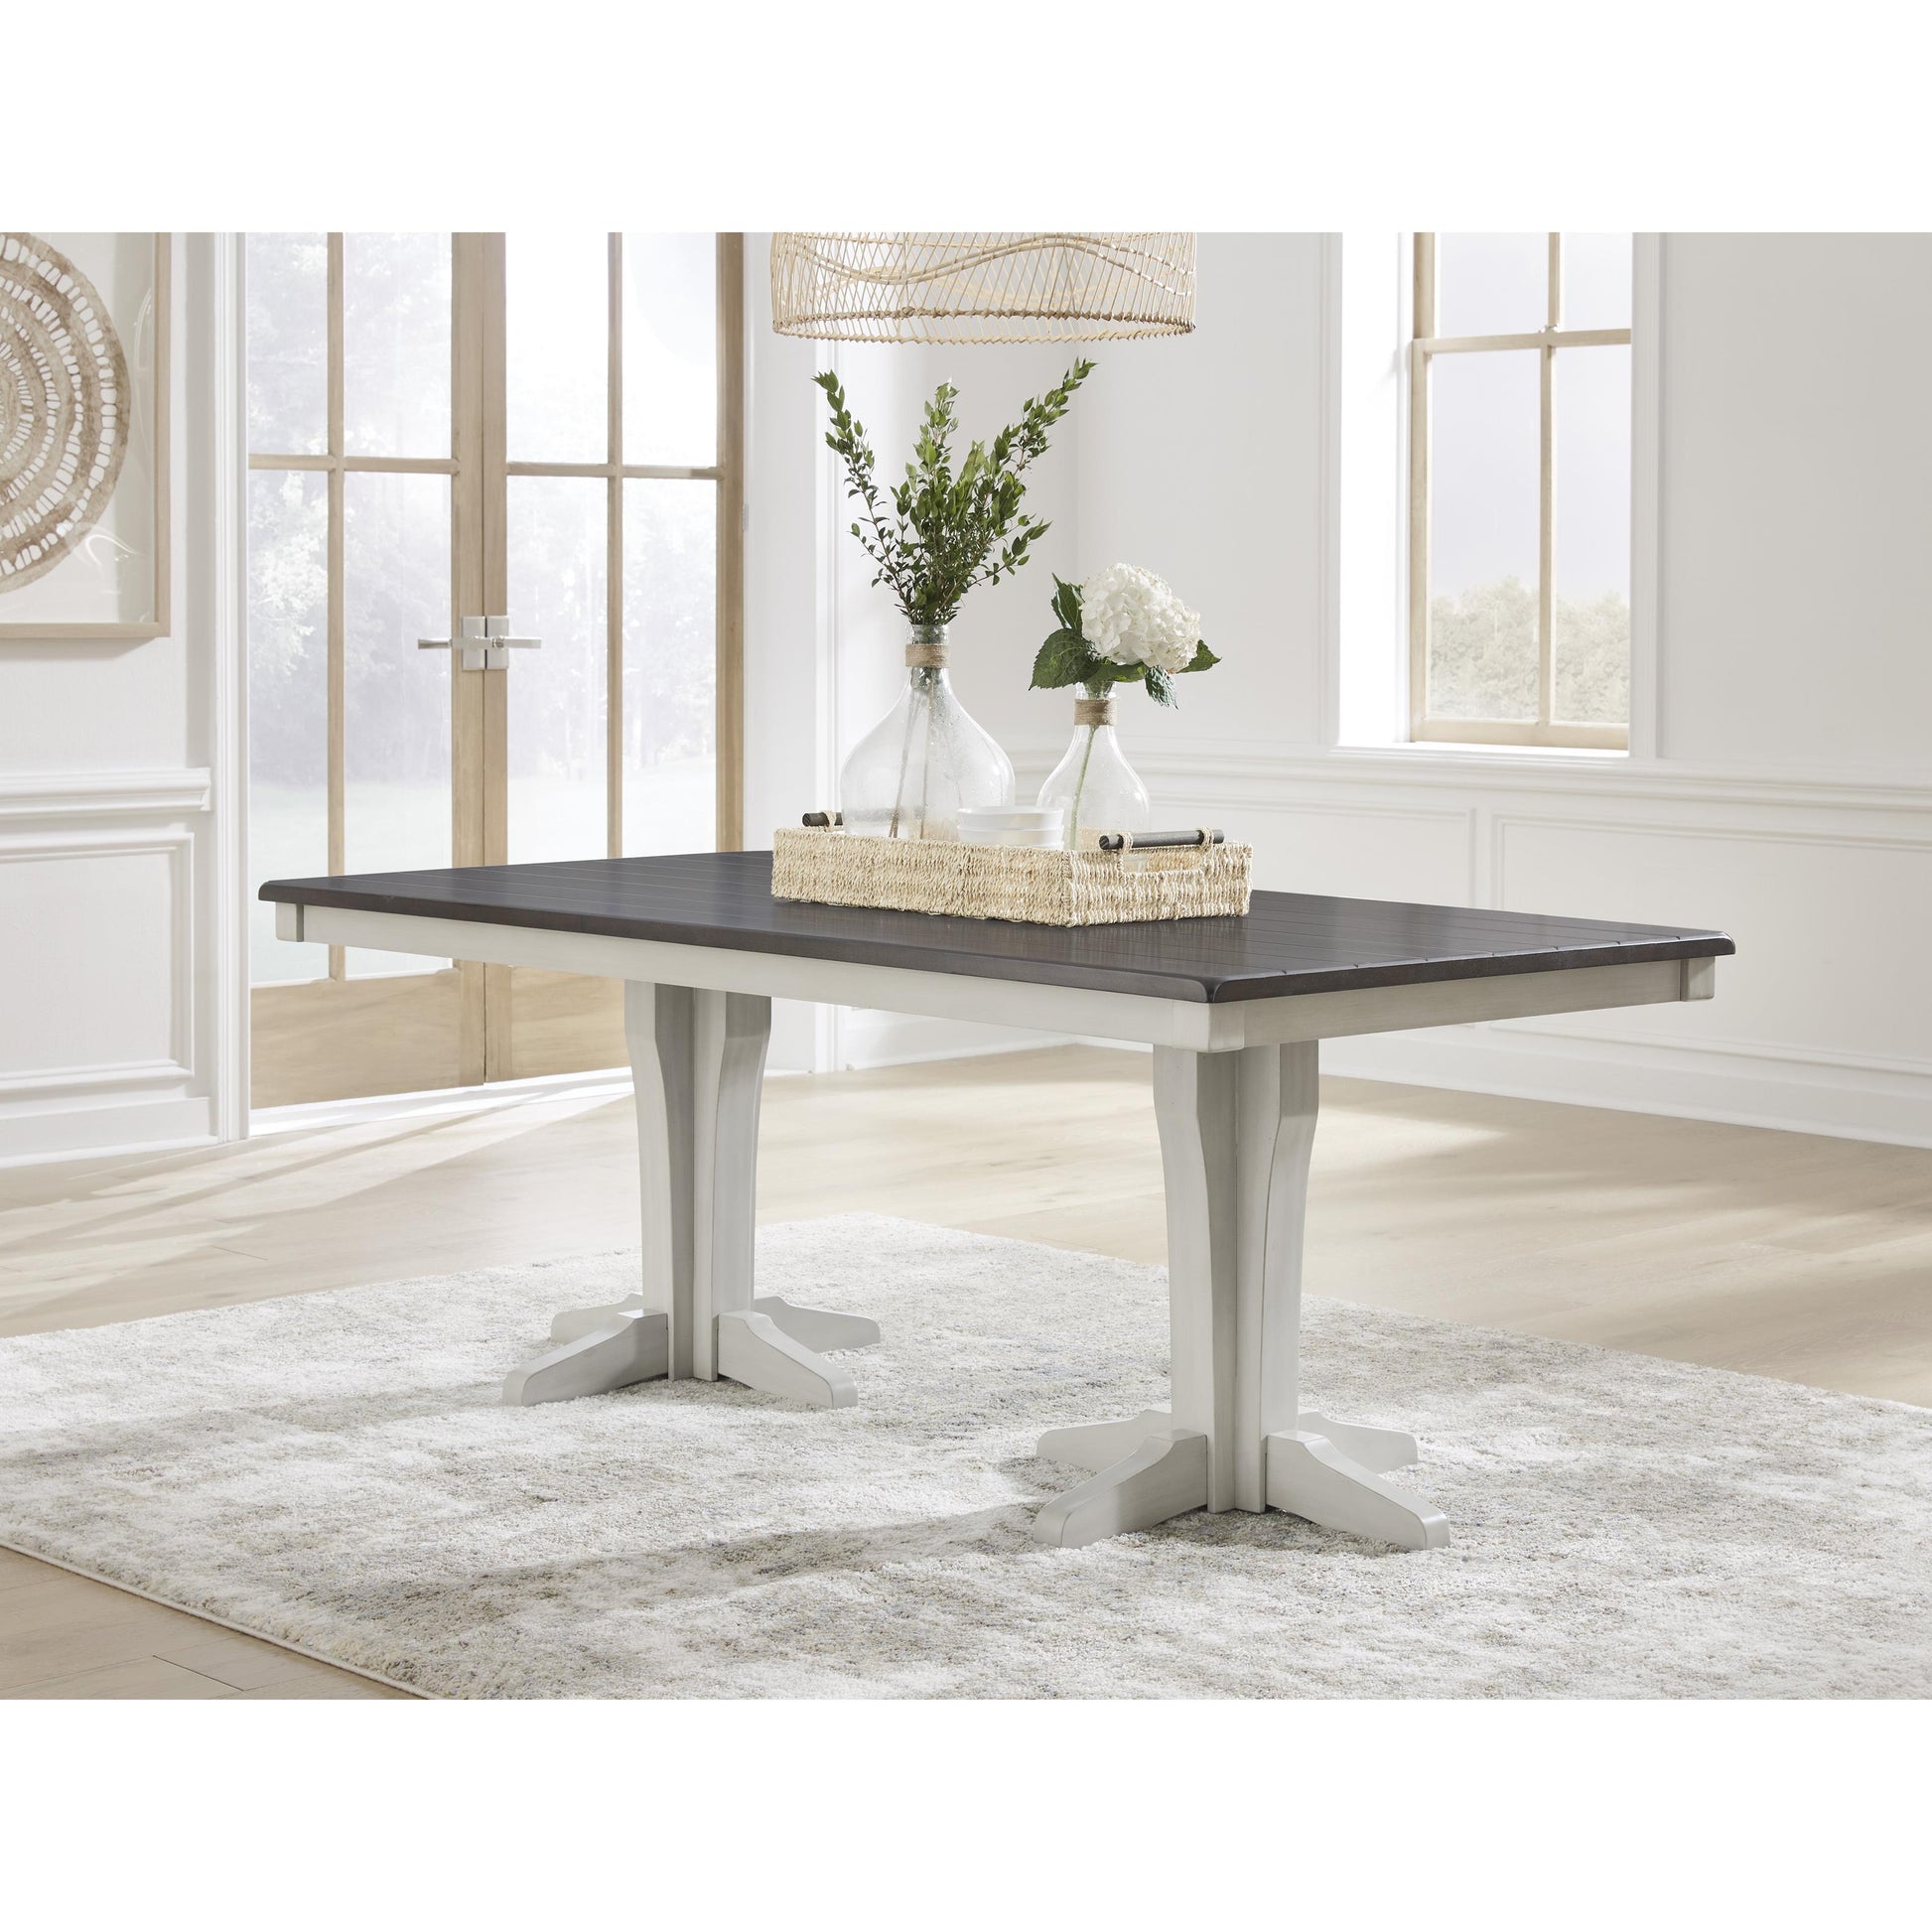 Signature Design by Ashley Darborn Dining Table D796-25B/D796-25T IMAGE 5